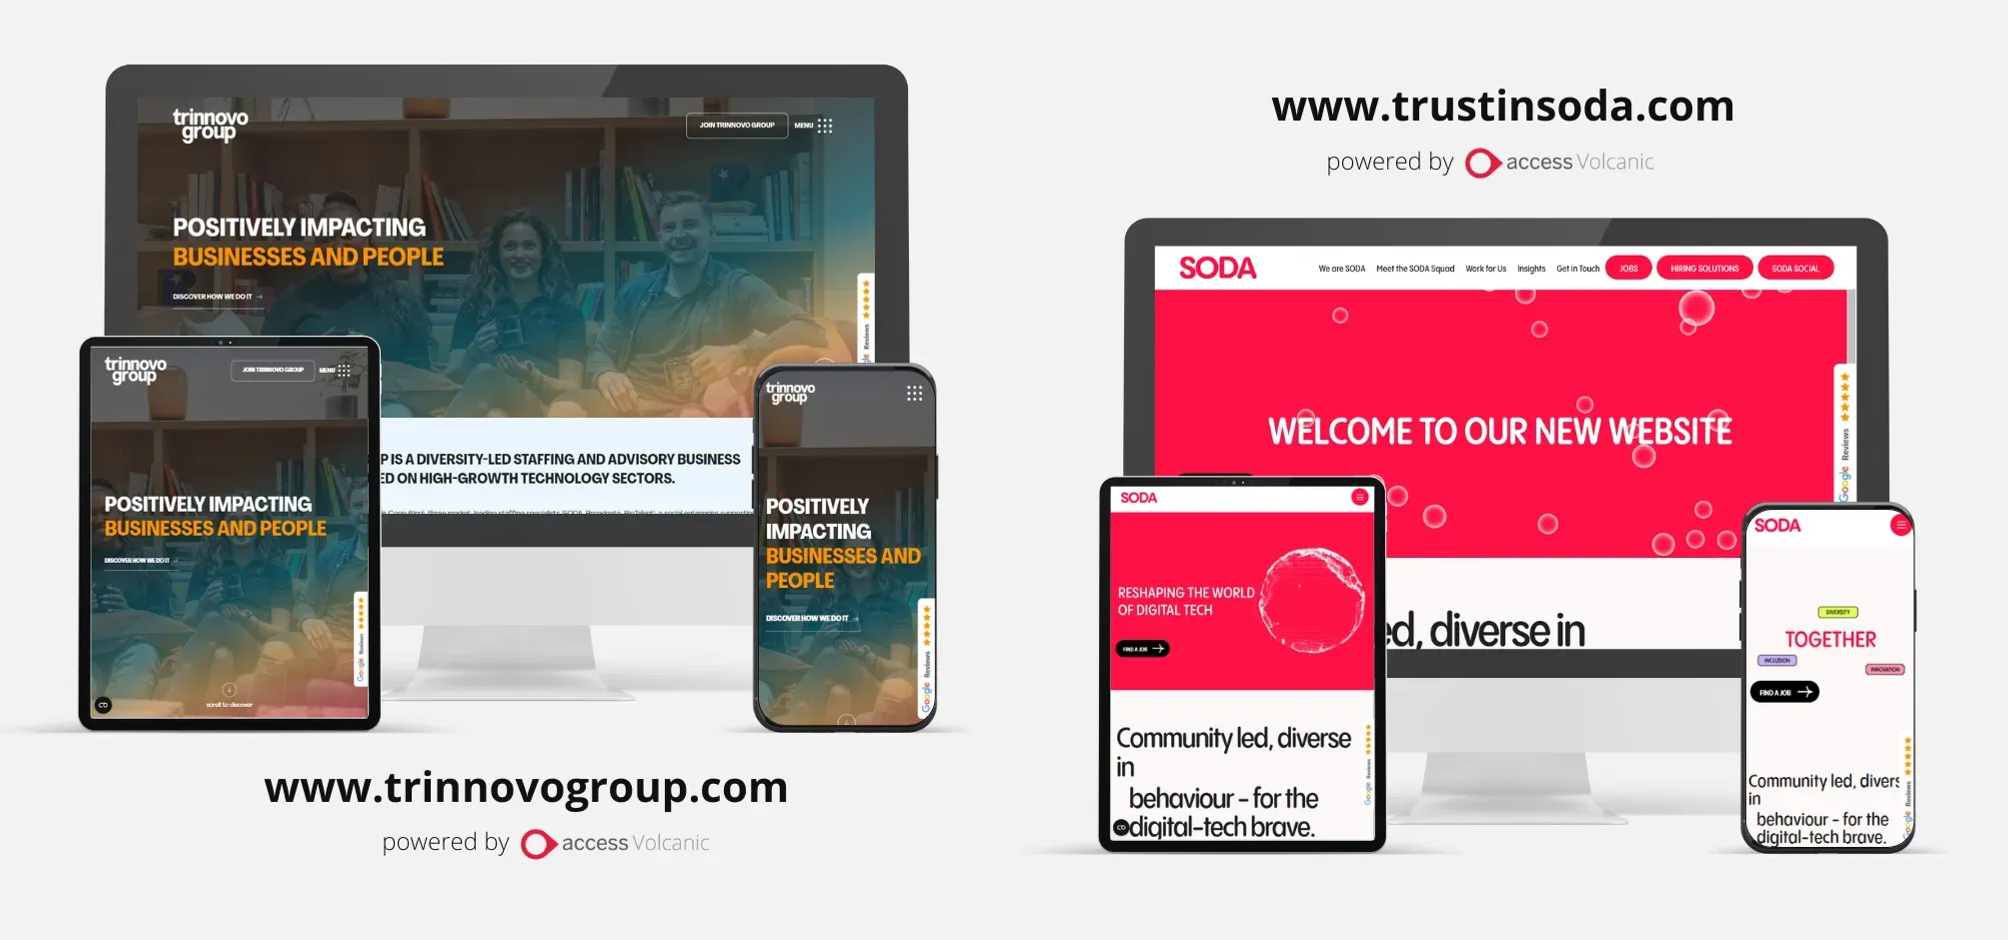 Trinnovo Group and Trust in Soda websites by Access Volcanic